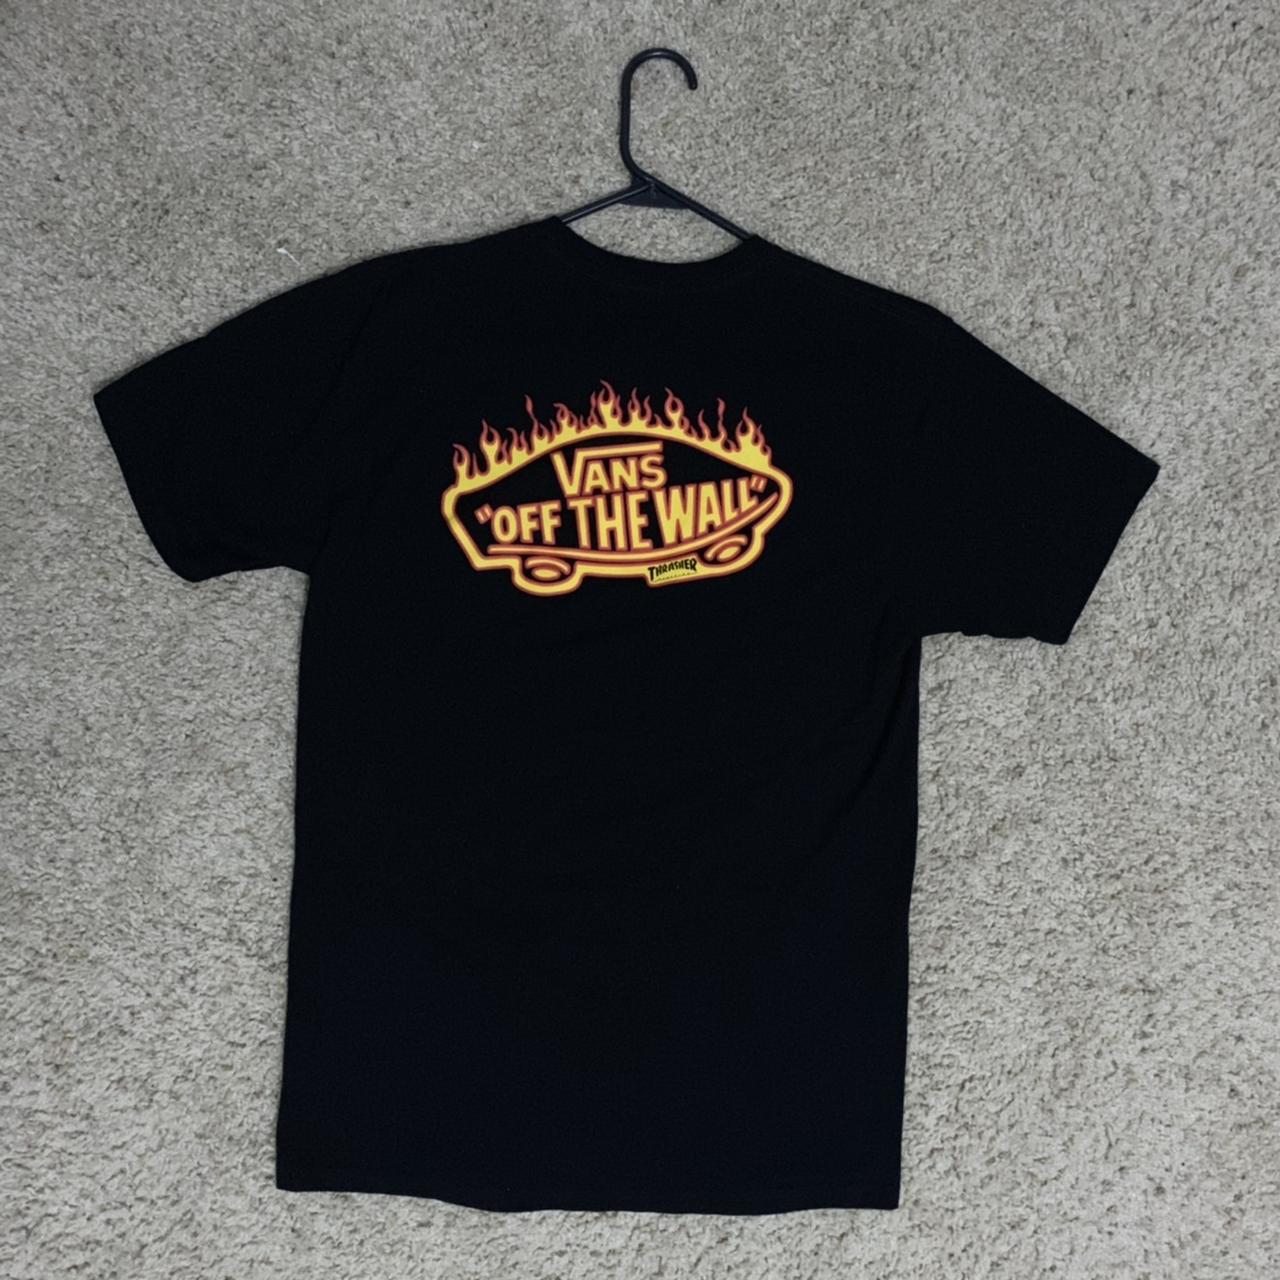 Articulation Hollywood arve Authentic Vans x Thrasher collab T-Shirt, size... - Depop